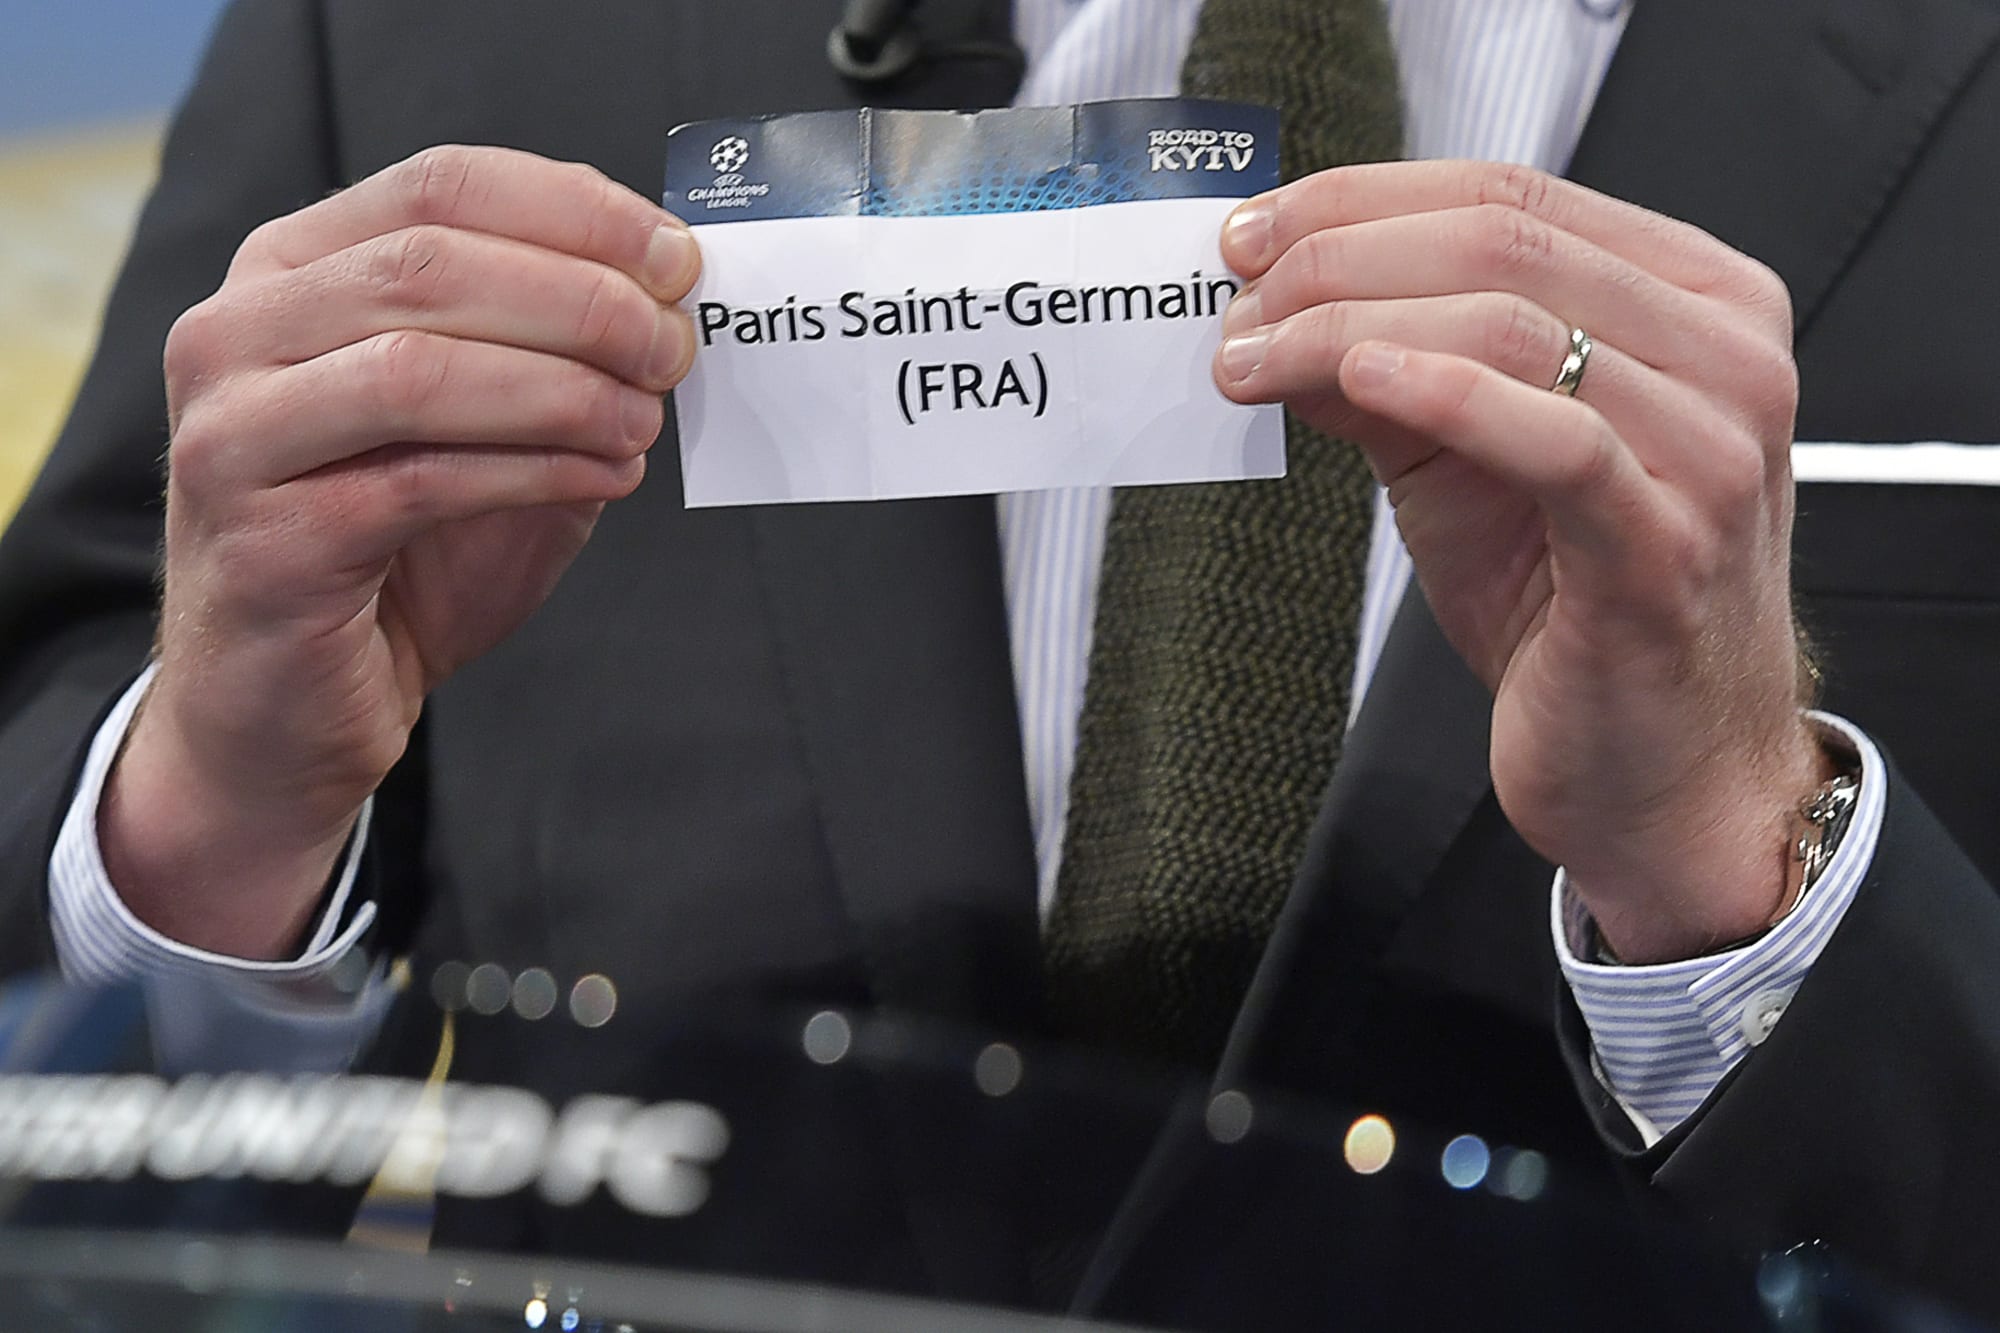 Real Madrid draw Paris Saint-Germain in the Champions League round of 16